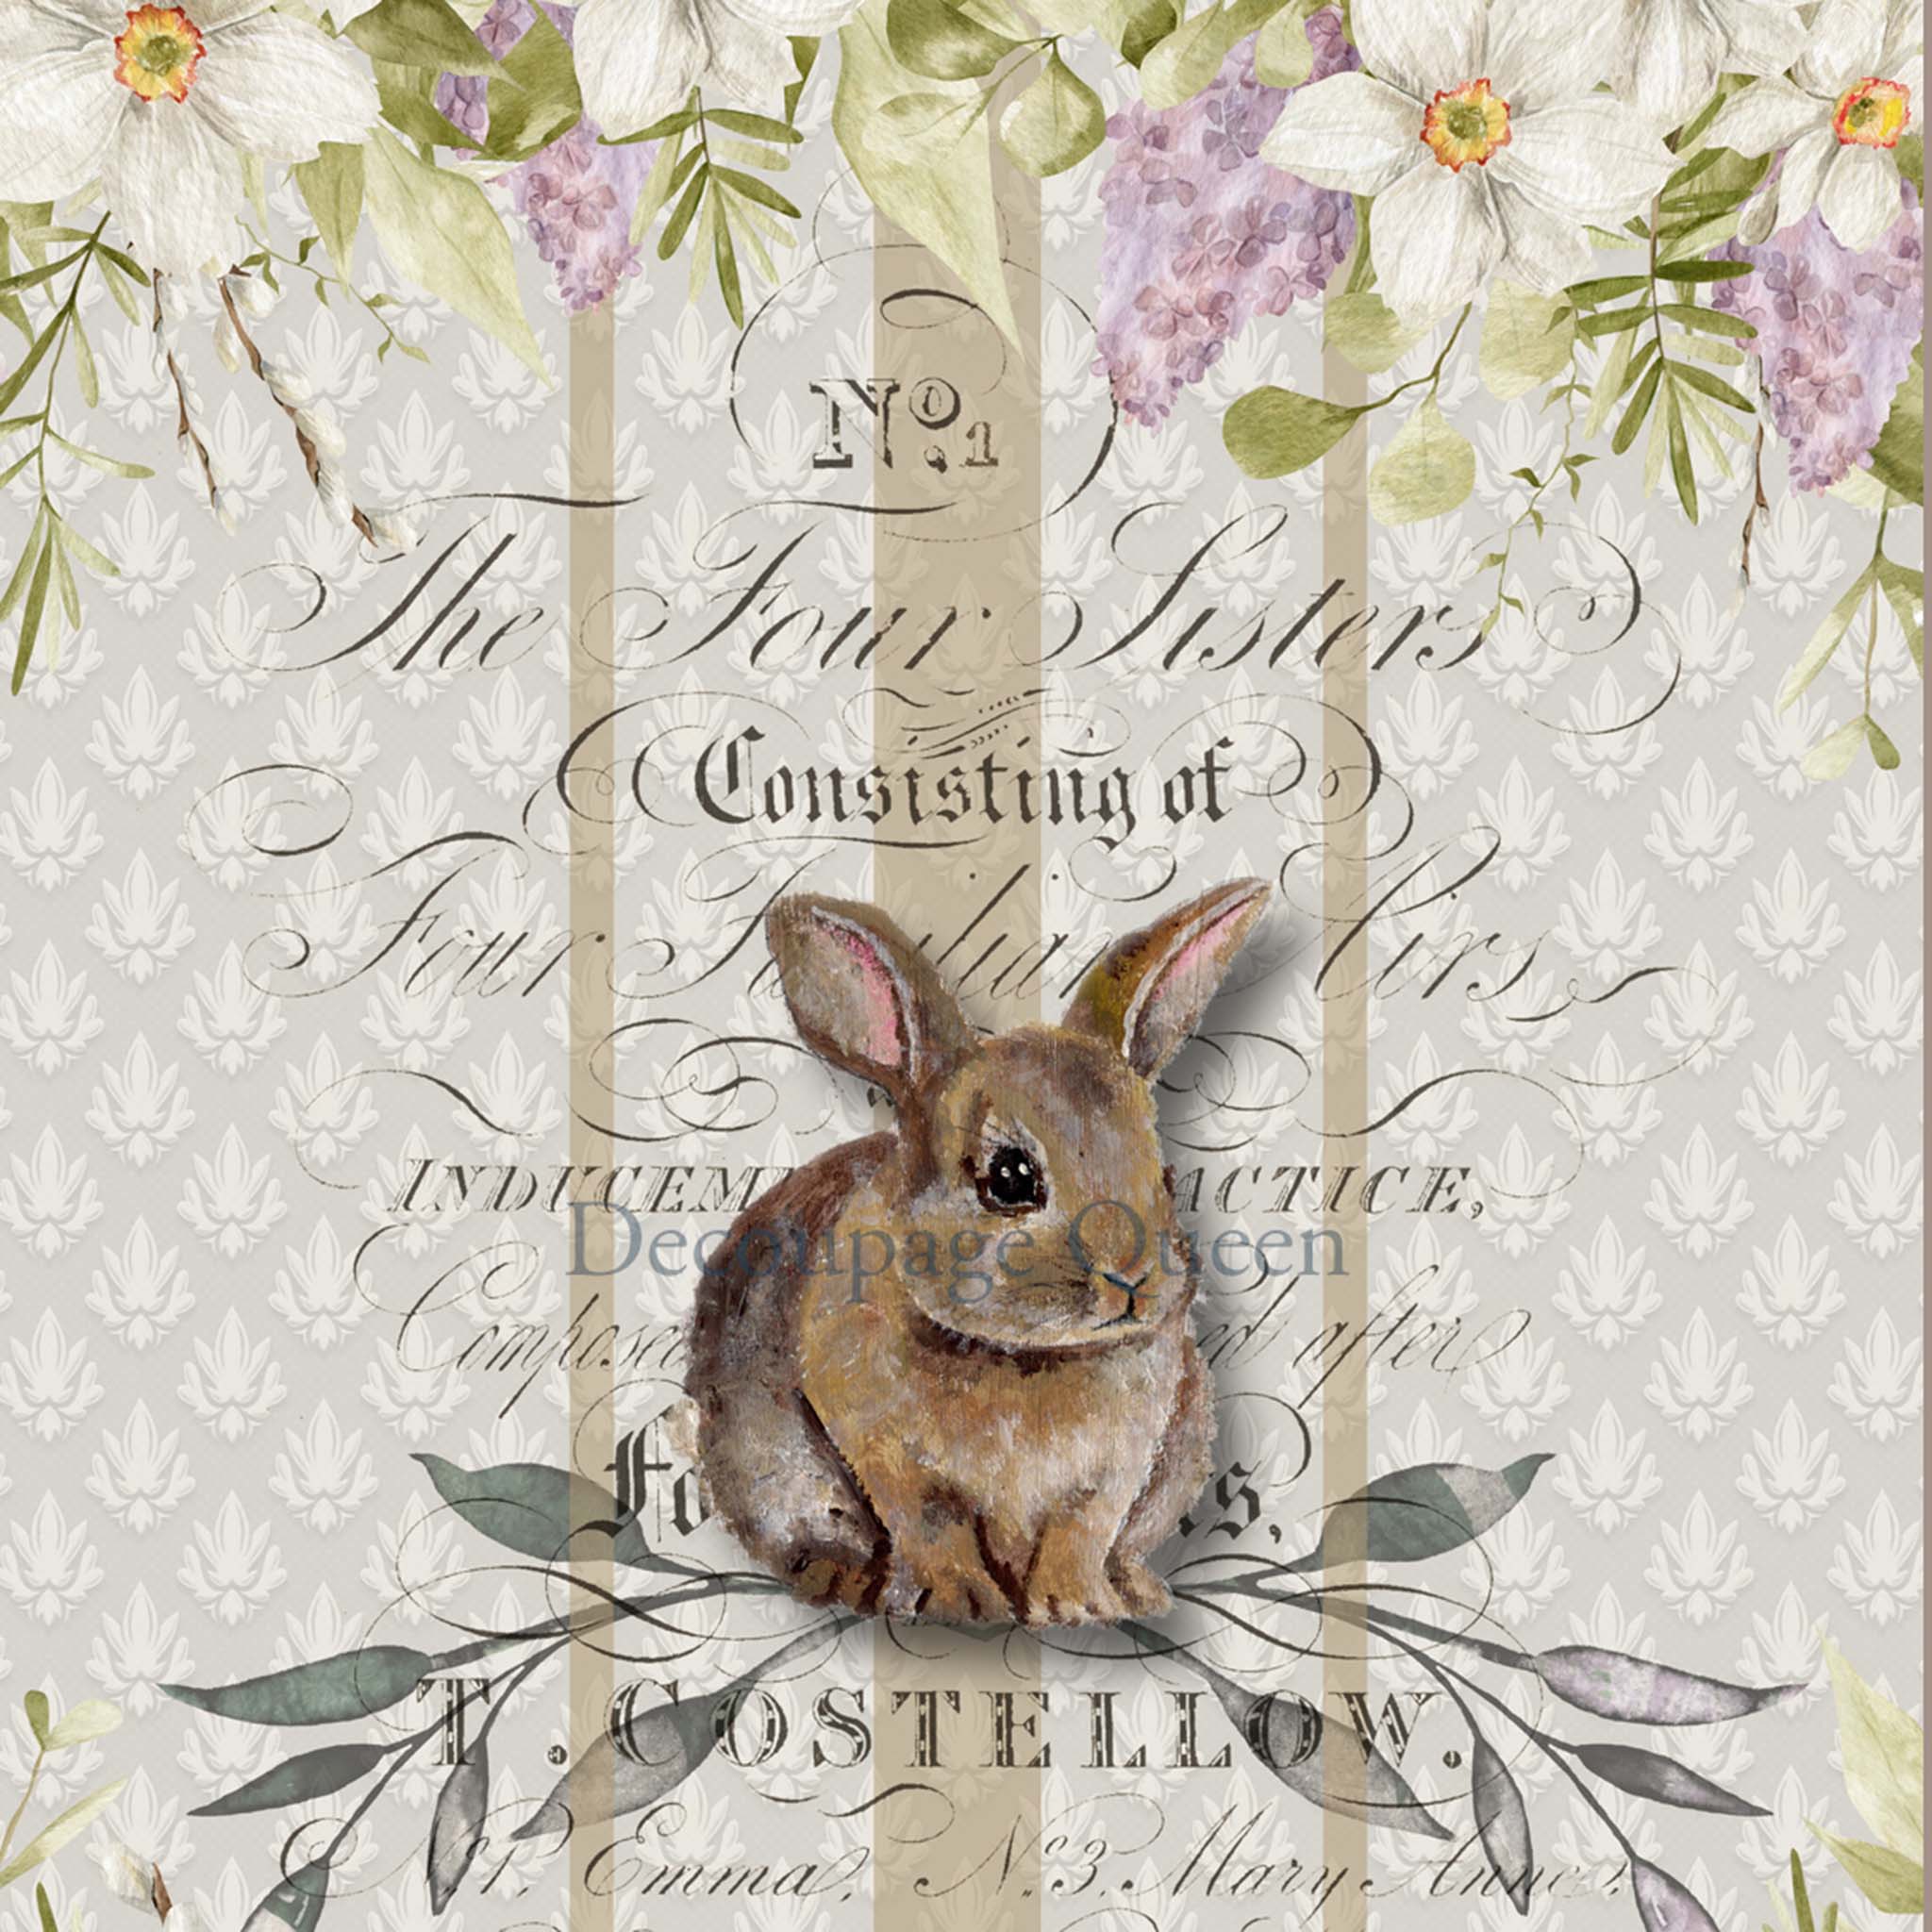 Close-up of an A4 rice paper design that features a charming bunny surrounded by beautiful flowers and elegant script with a repeating flourish pattern in the background.